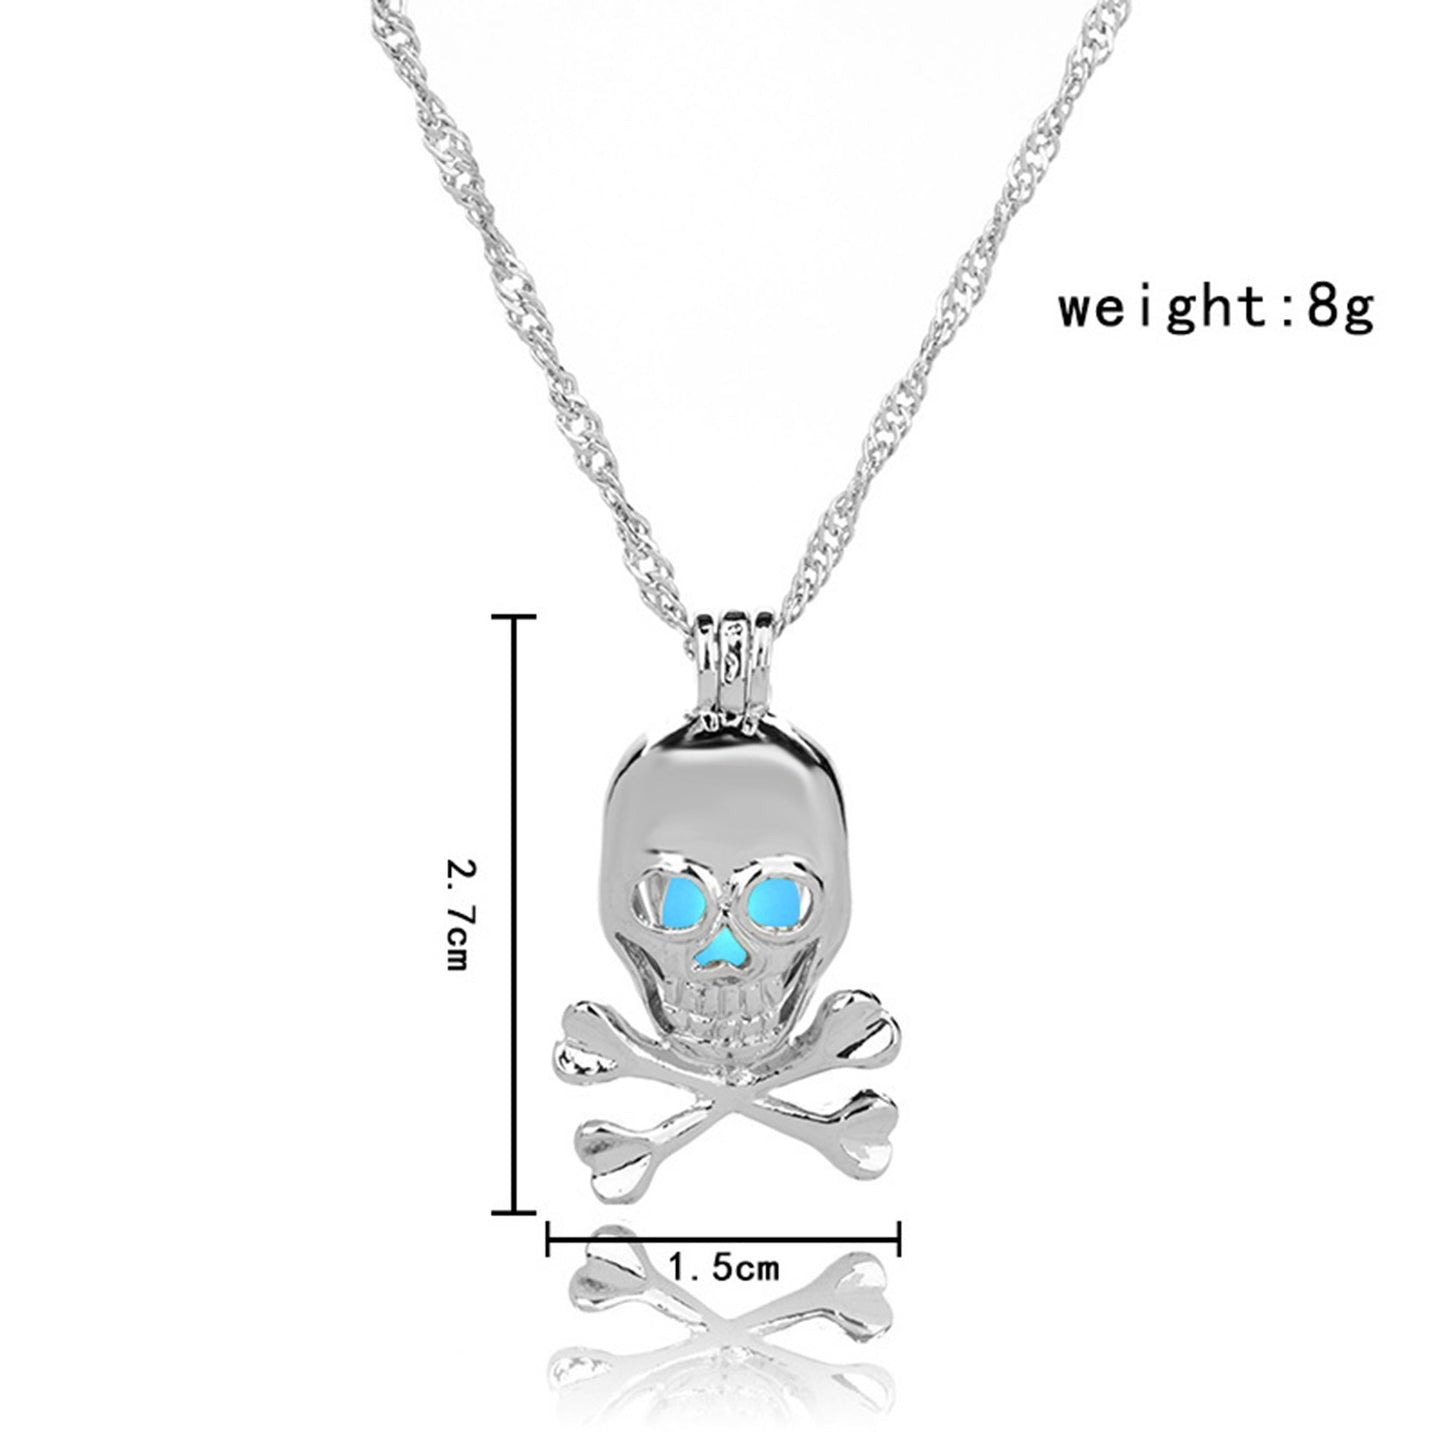 Punk Style Skull Pendant Necklace Luminous Jewelry Silver Color Chain Glow in the Dark Choker Statement Necklace For Women Gift